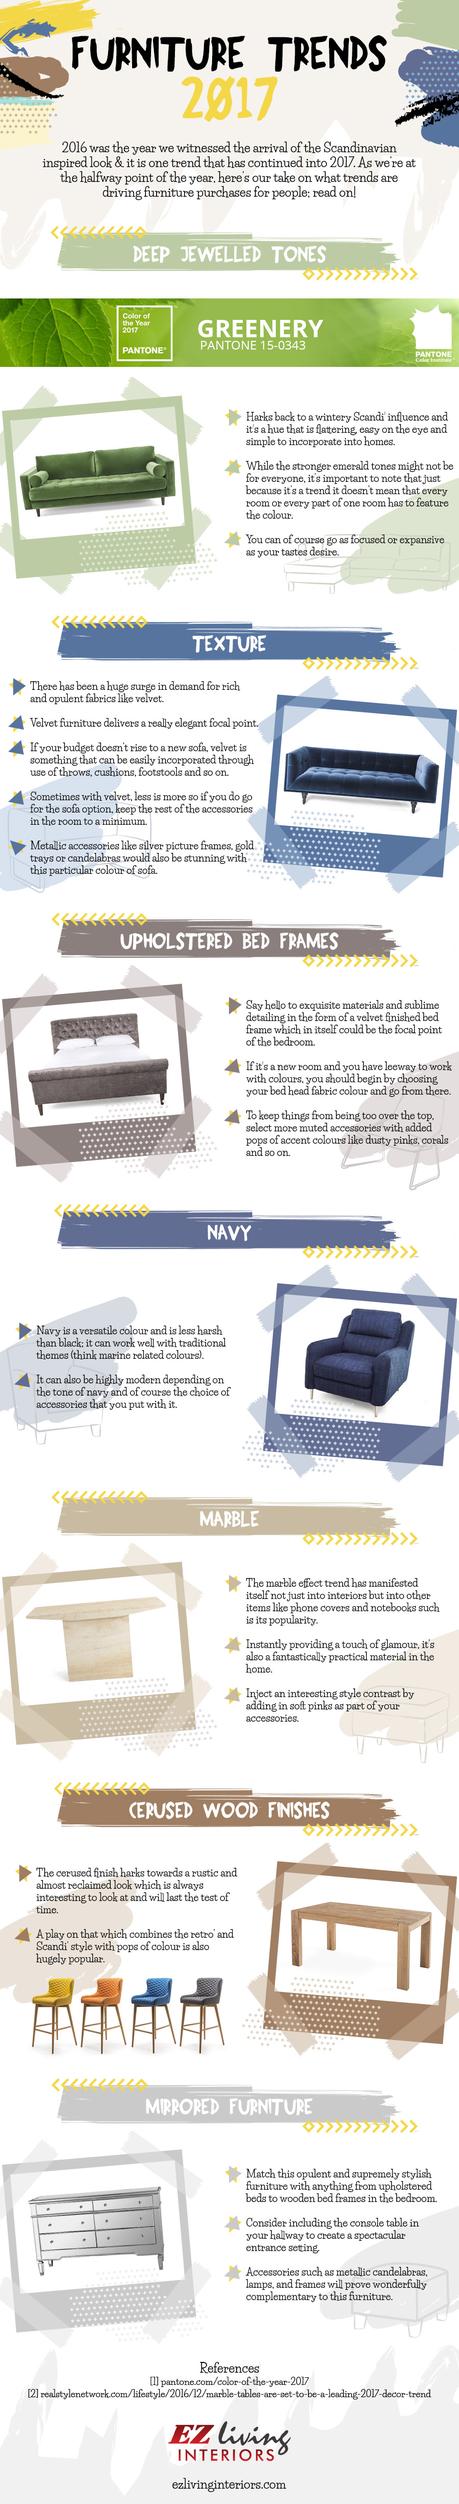 2017 Furniture Trends – Infographic